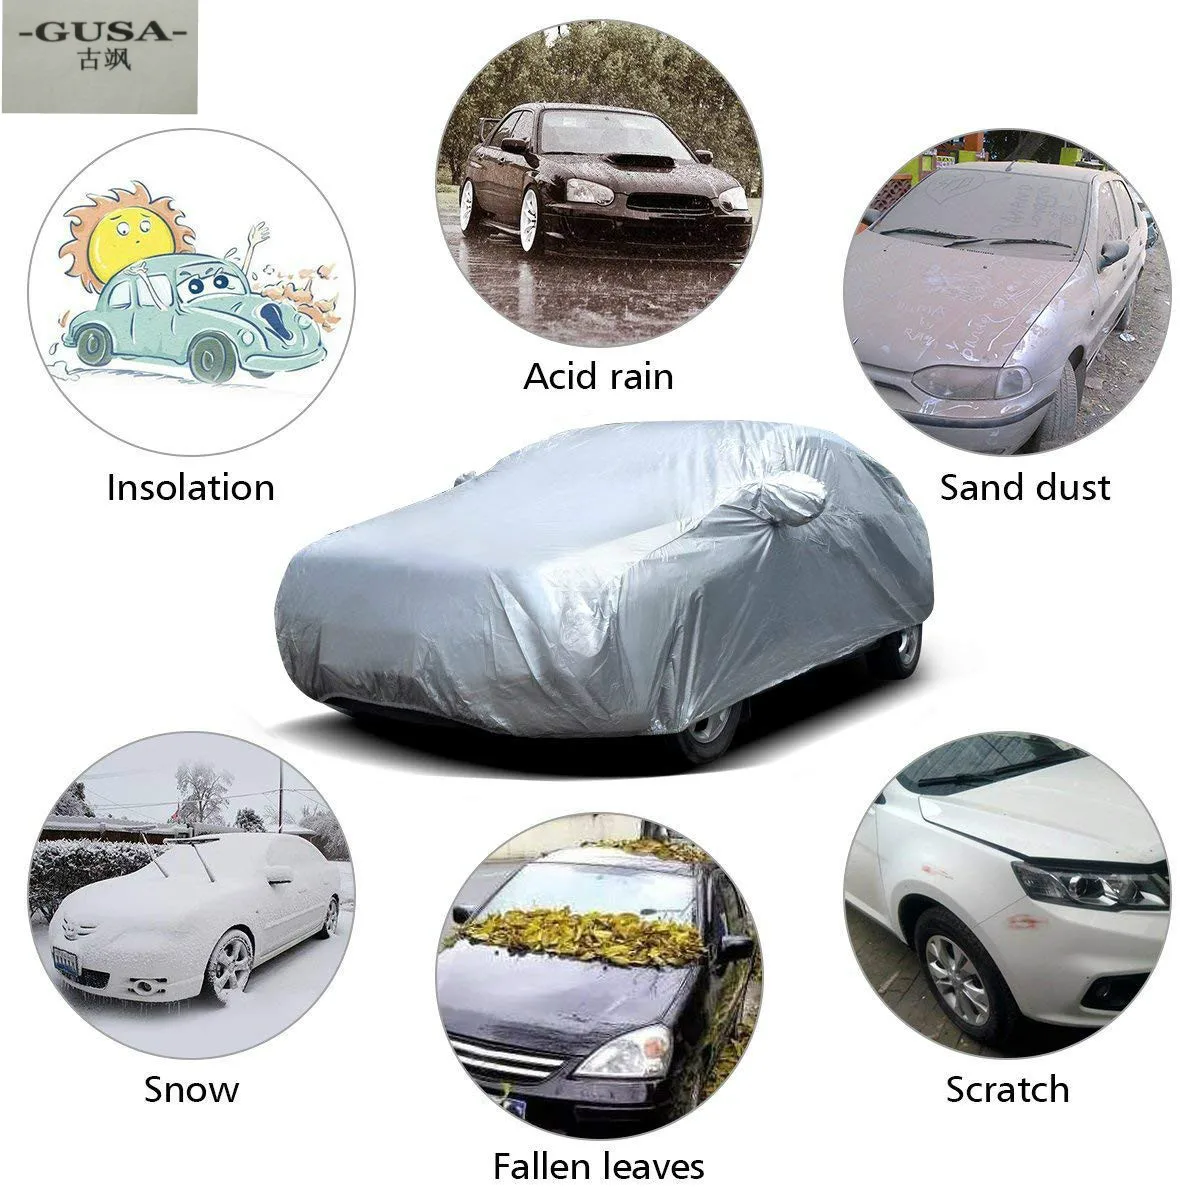 

SUNZM Car cover tent waterproof snowproof all weather in winter snow rain Awning for car hatchback sedan suv toyota audi etc